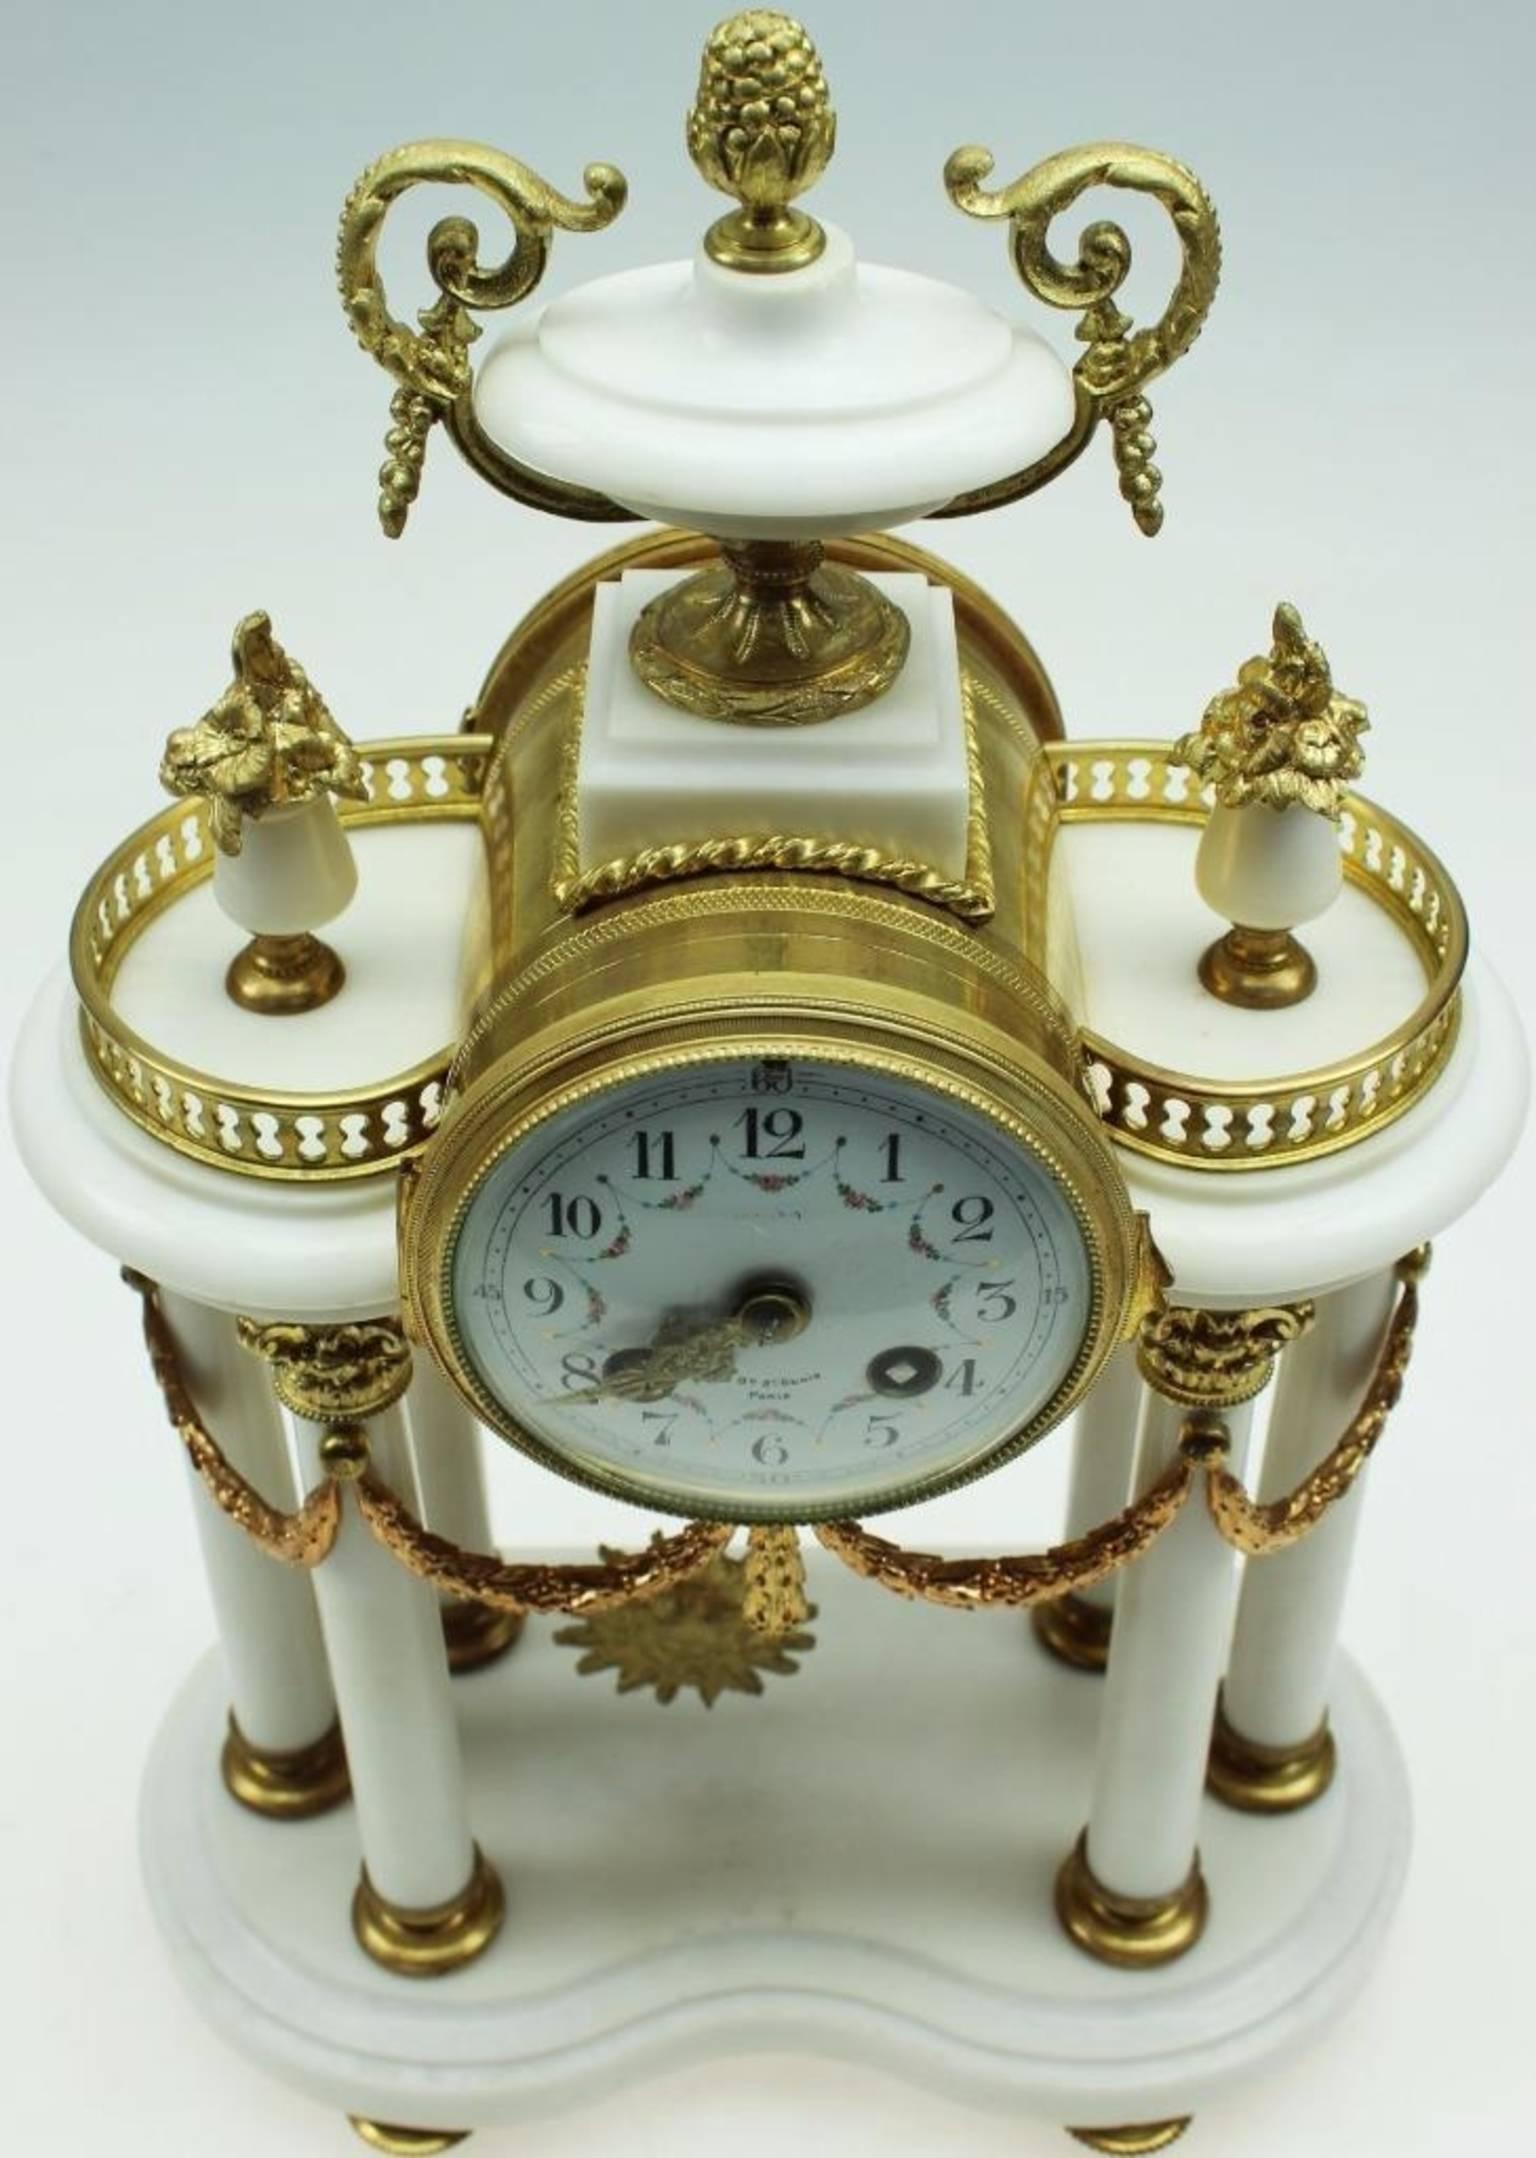 Hand-Crafted Napoleon III White Marble and Ormolu Mantel Clock Set, Garniture by Mougin Paris